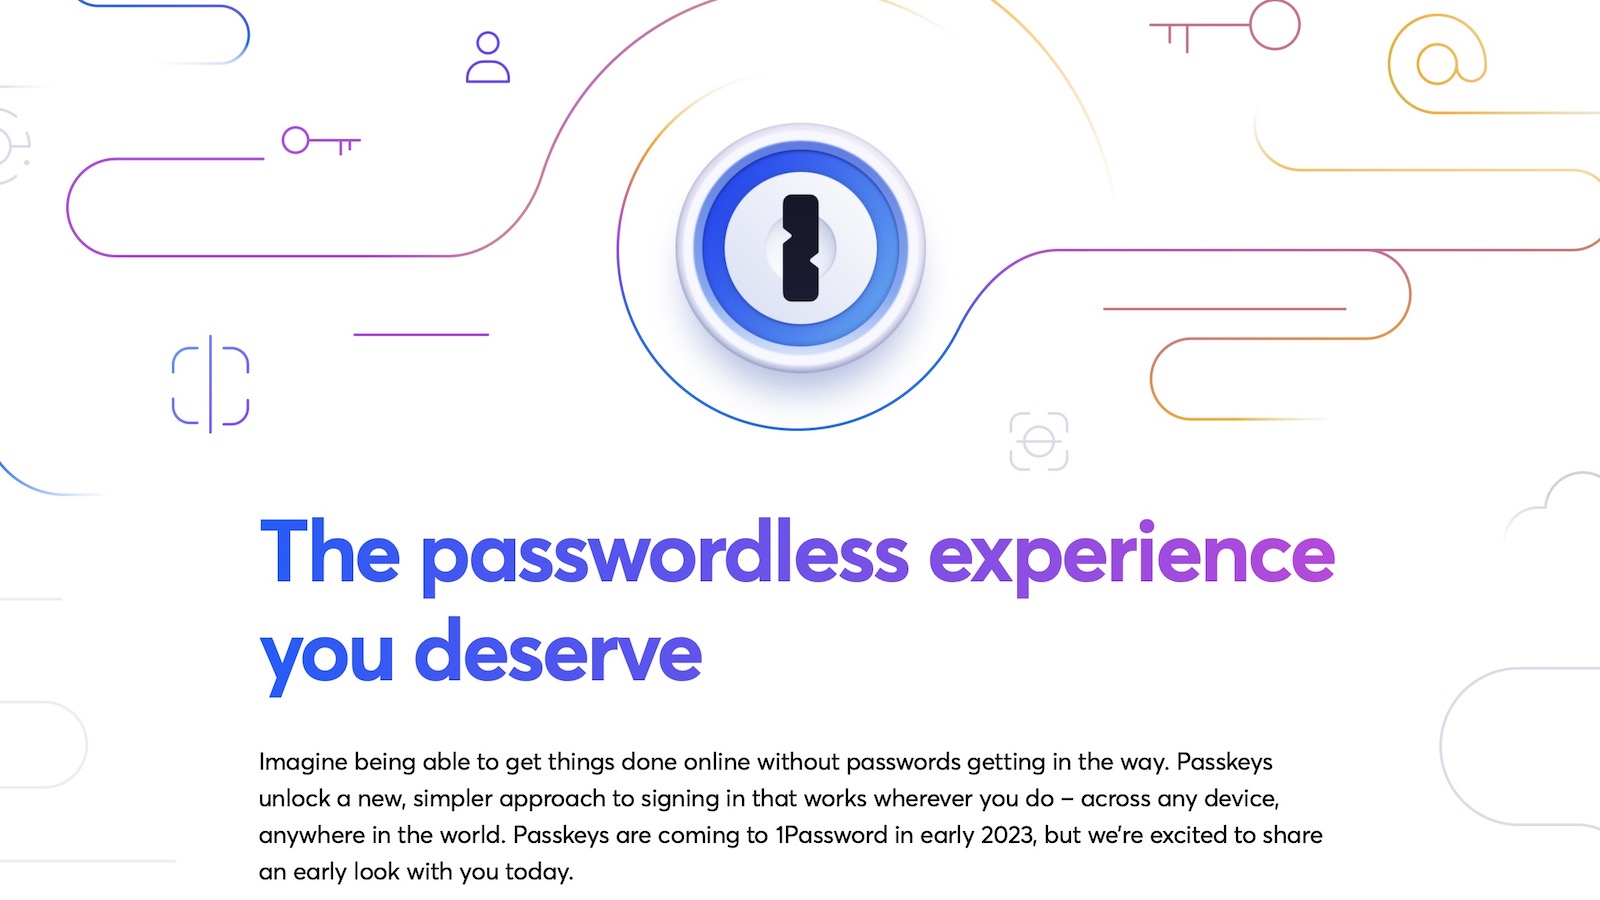 1Password Will Support Passkeys Starting in Early 2023